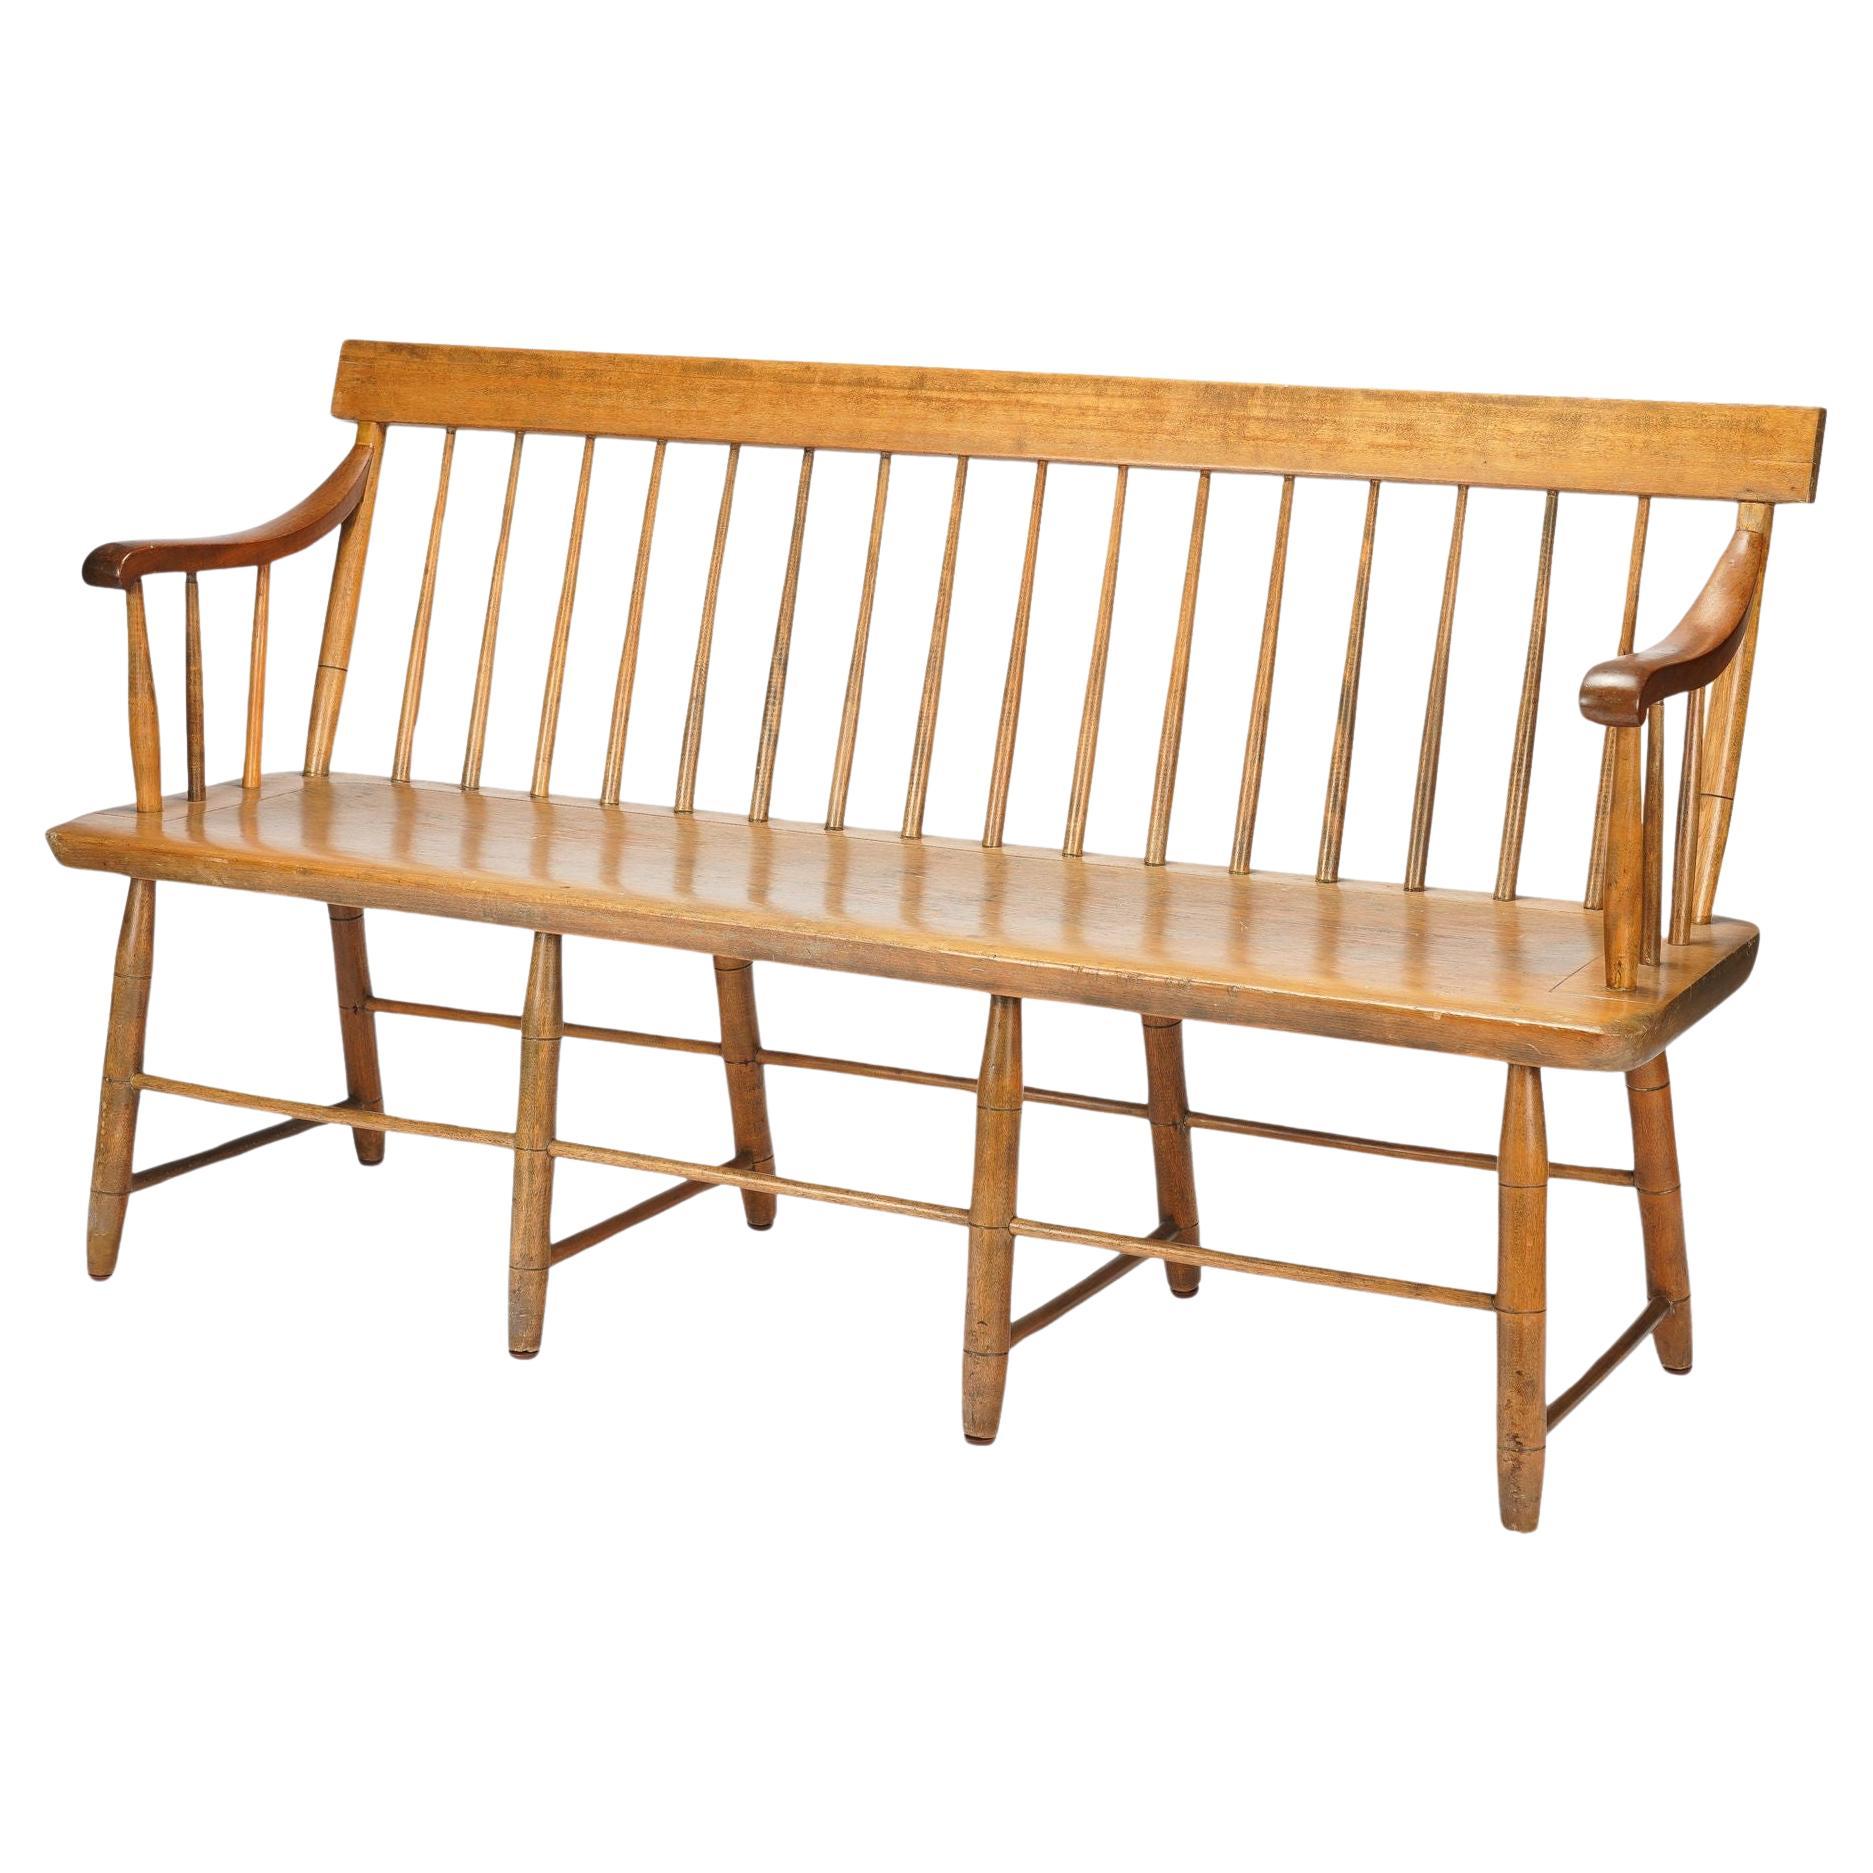 American Windsor bench, c. 1830 For Sale